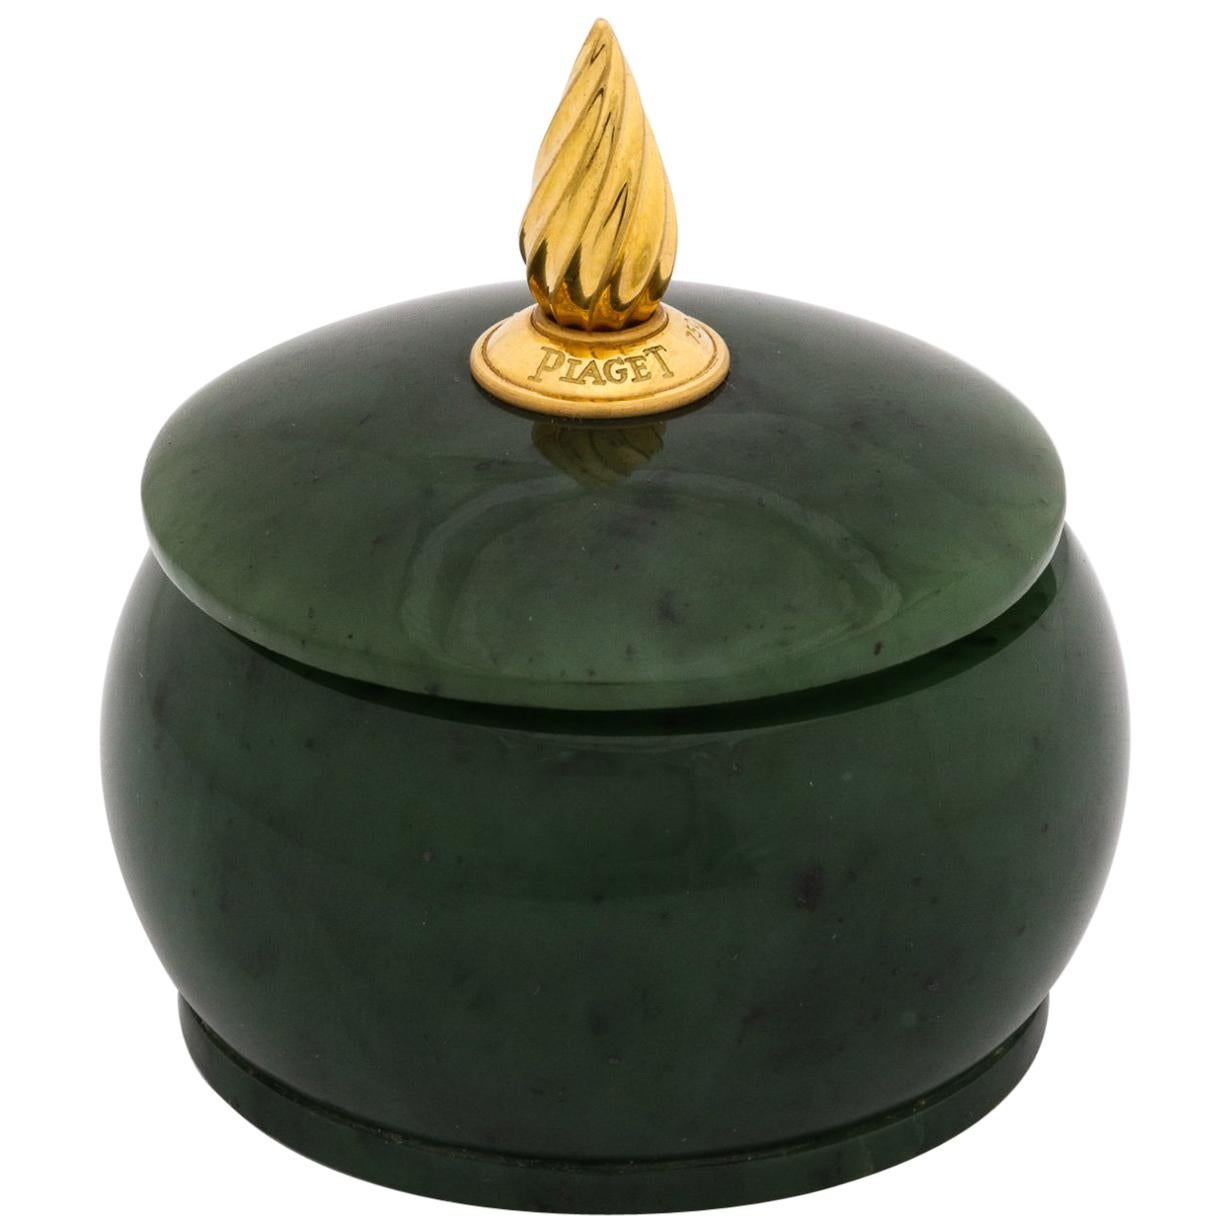 18-Karat Gold and Spinach Jade Round Box with Cover by Piaget Geneve